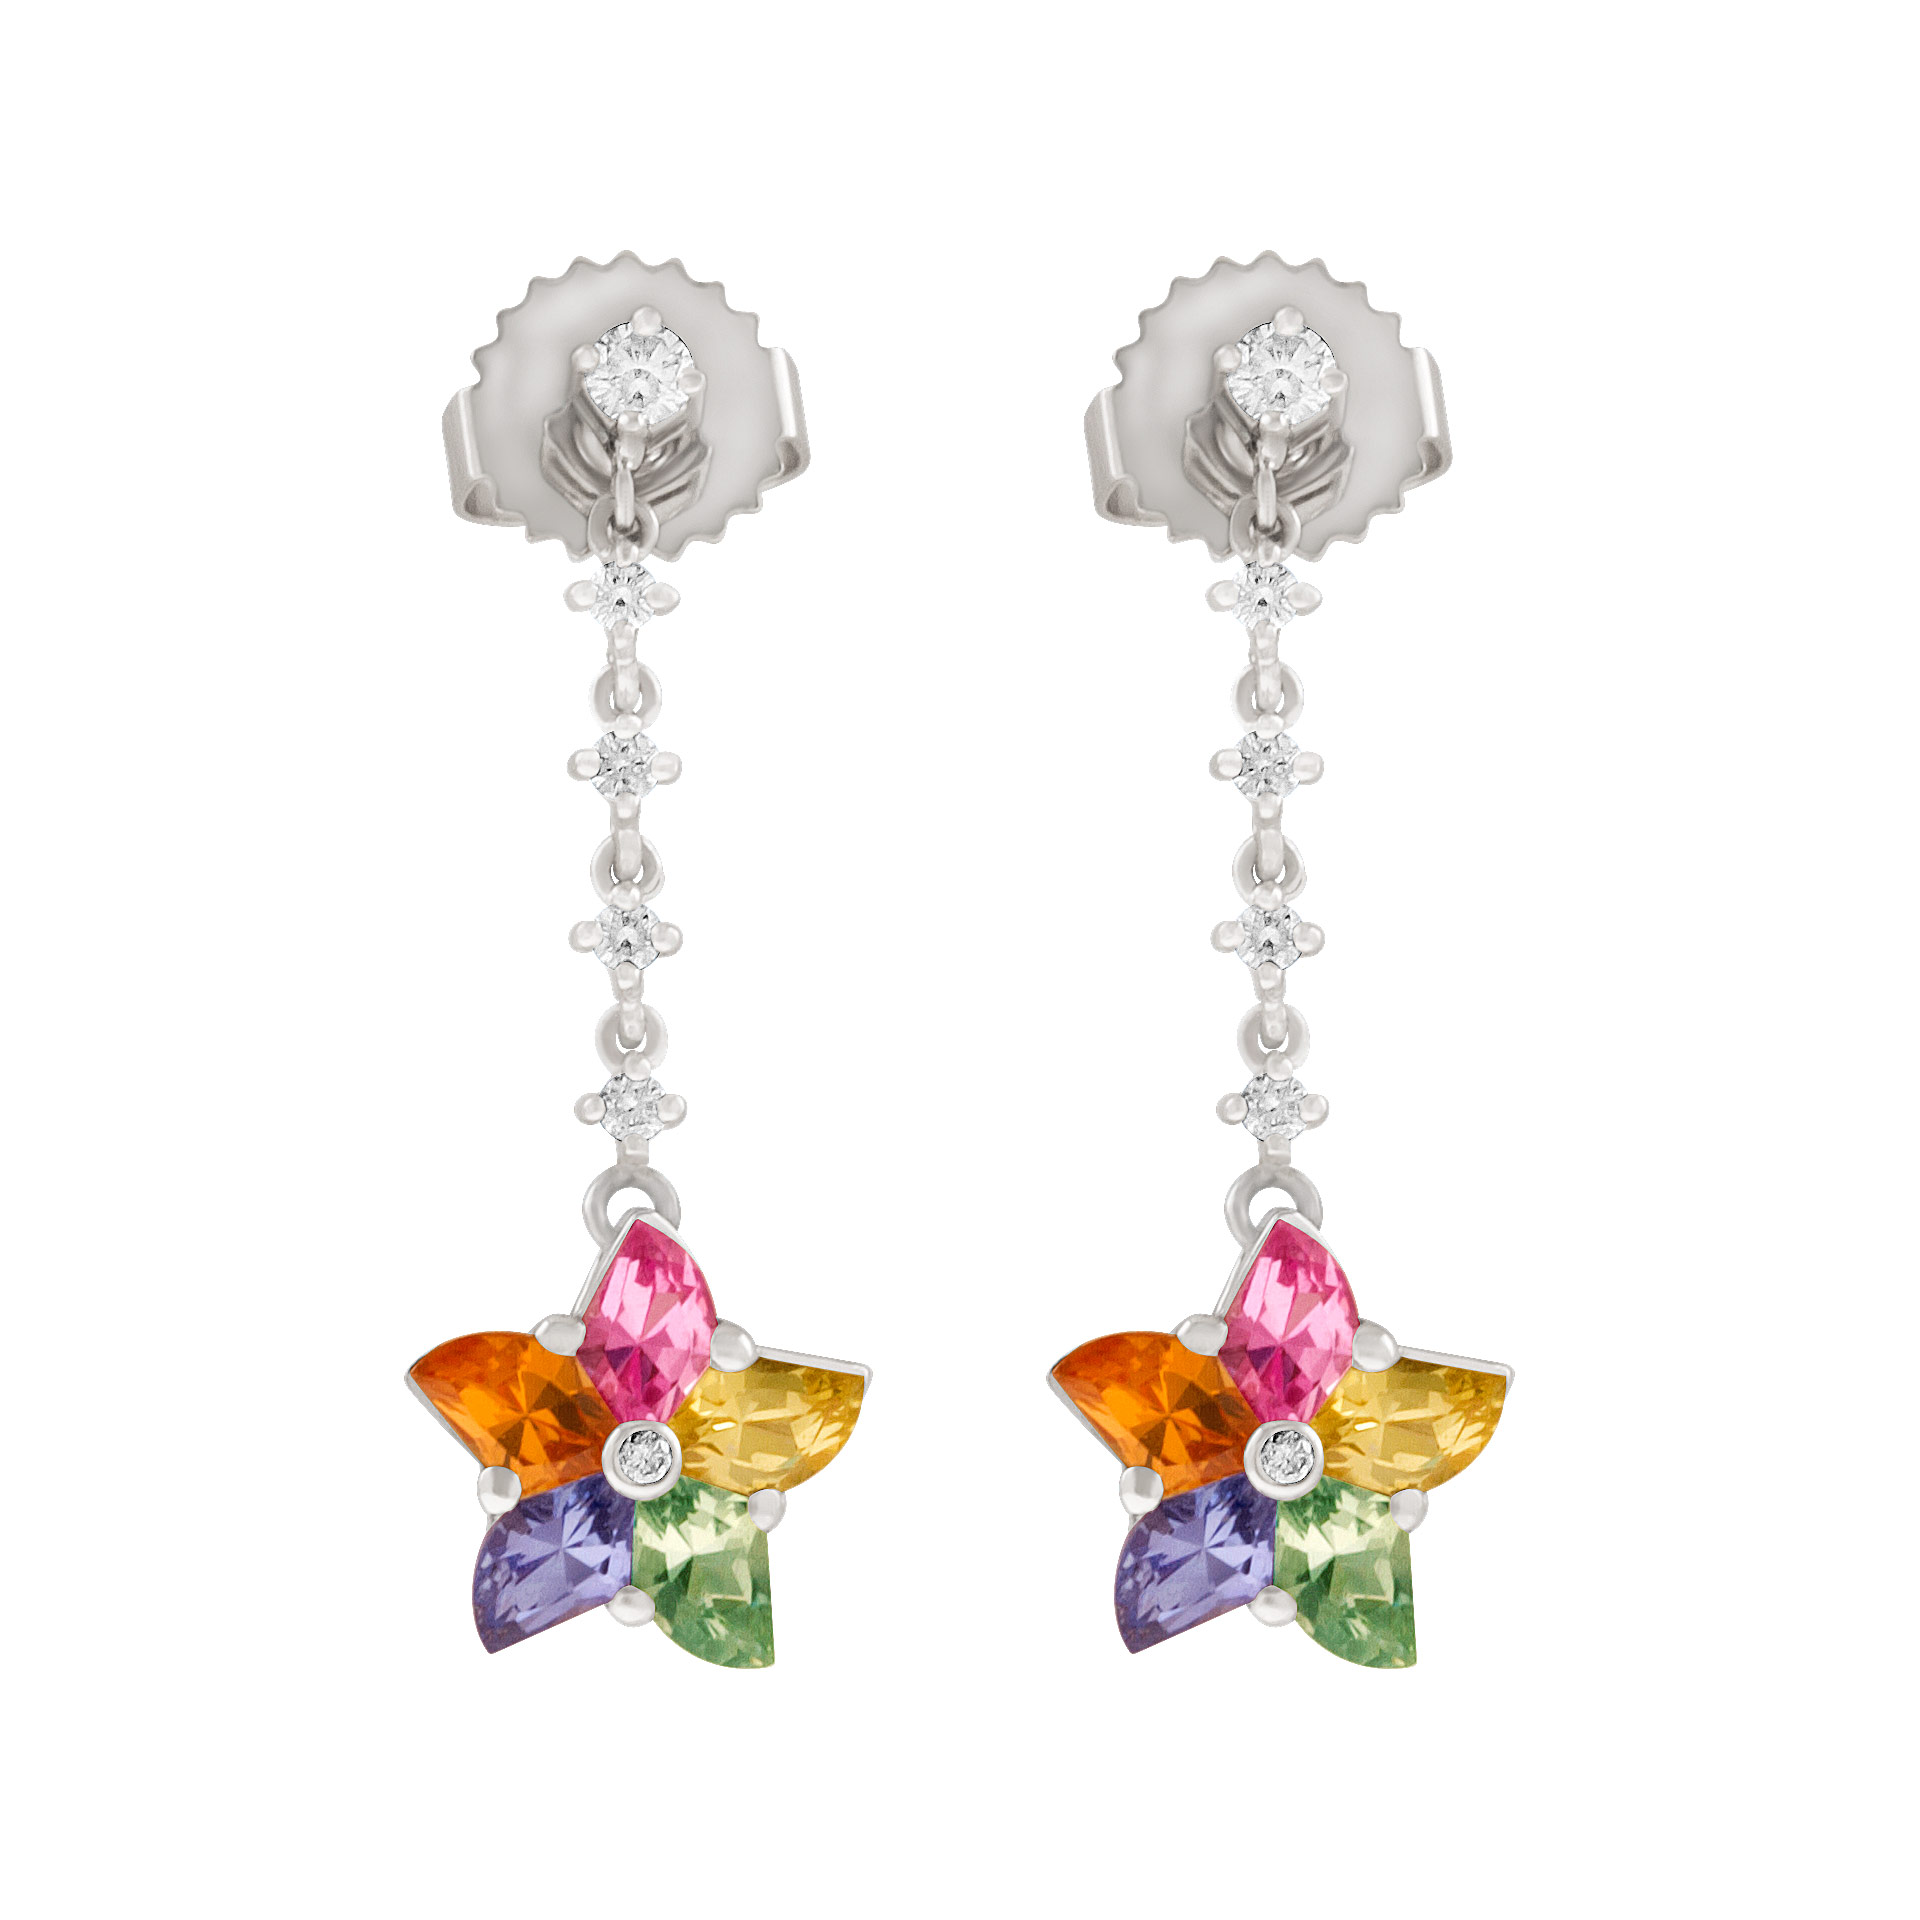 Diamond and sapphire drop earrings in floral style set in 18k white gold image 1